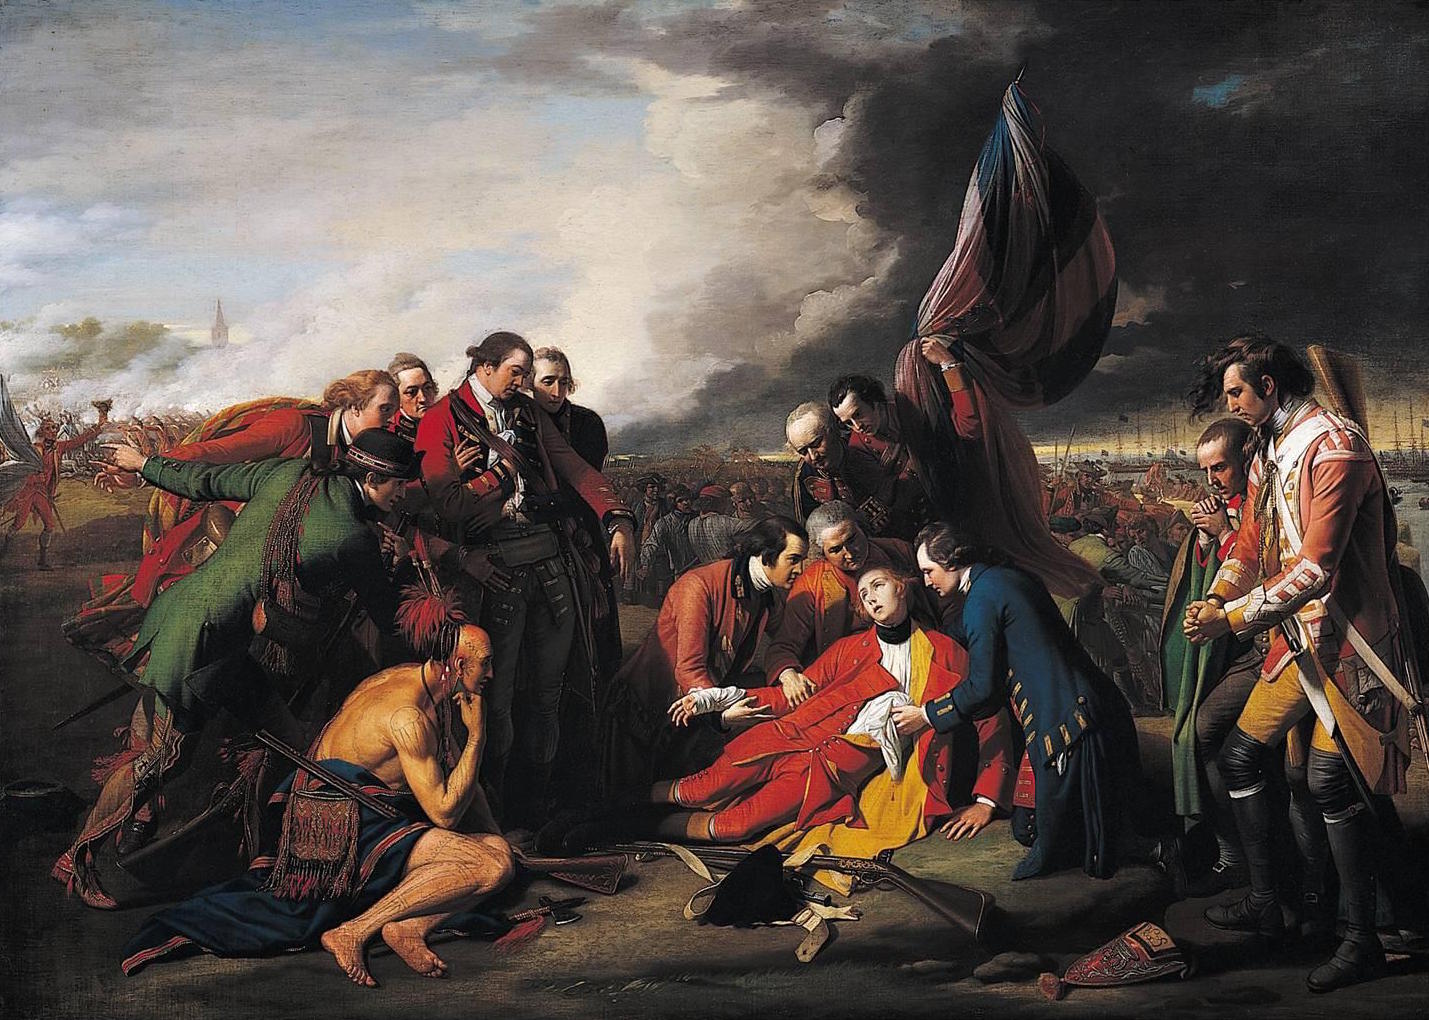 The Death of General Wolfe by Benjamin West - 1771 - 1,51 m x 2,13 m National Gallery of Canada